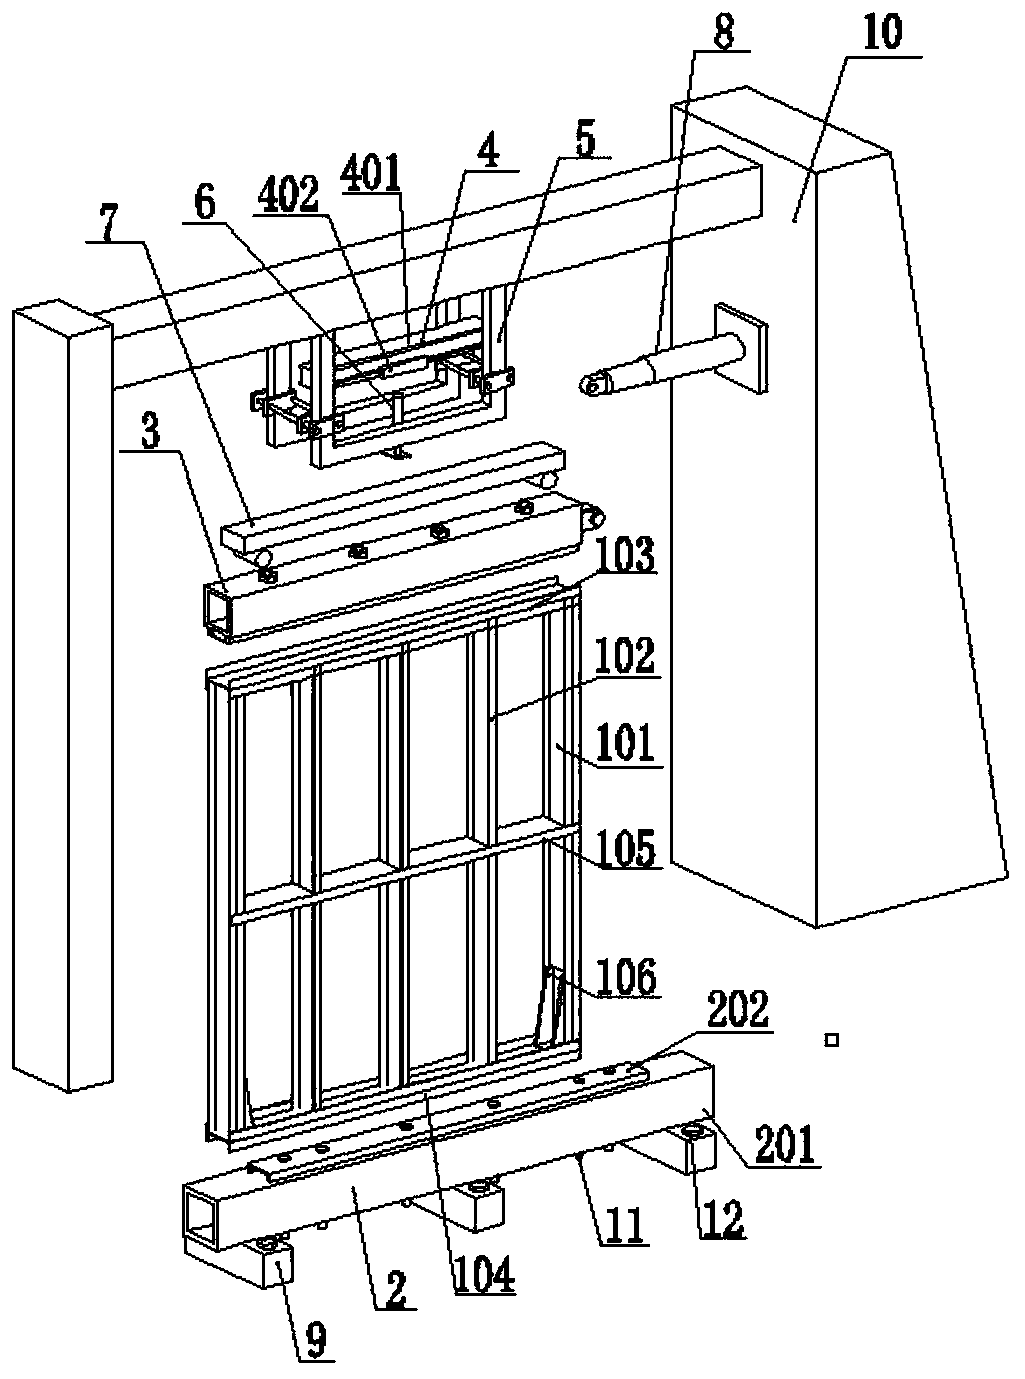 An anti-seismic test device and installation method of a prefabricated cold-formed thin-walled steel wall